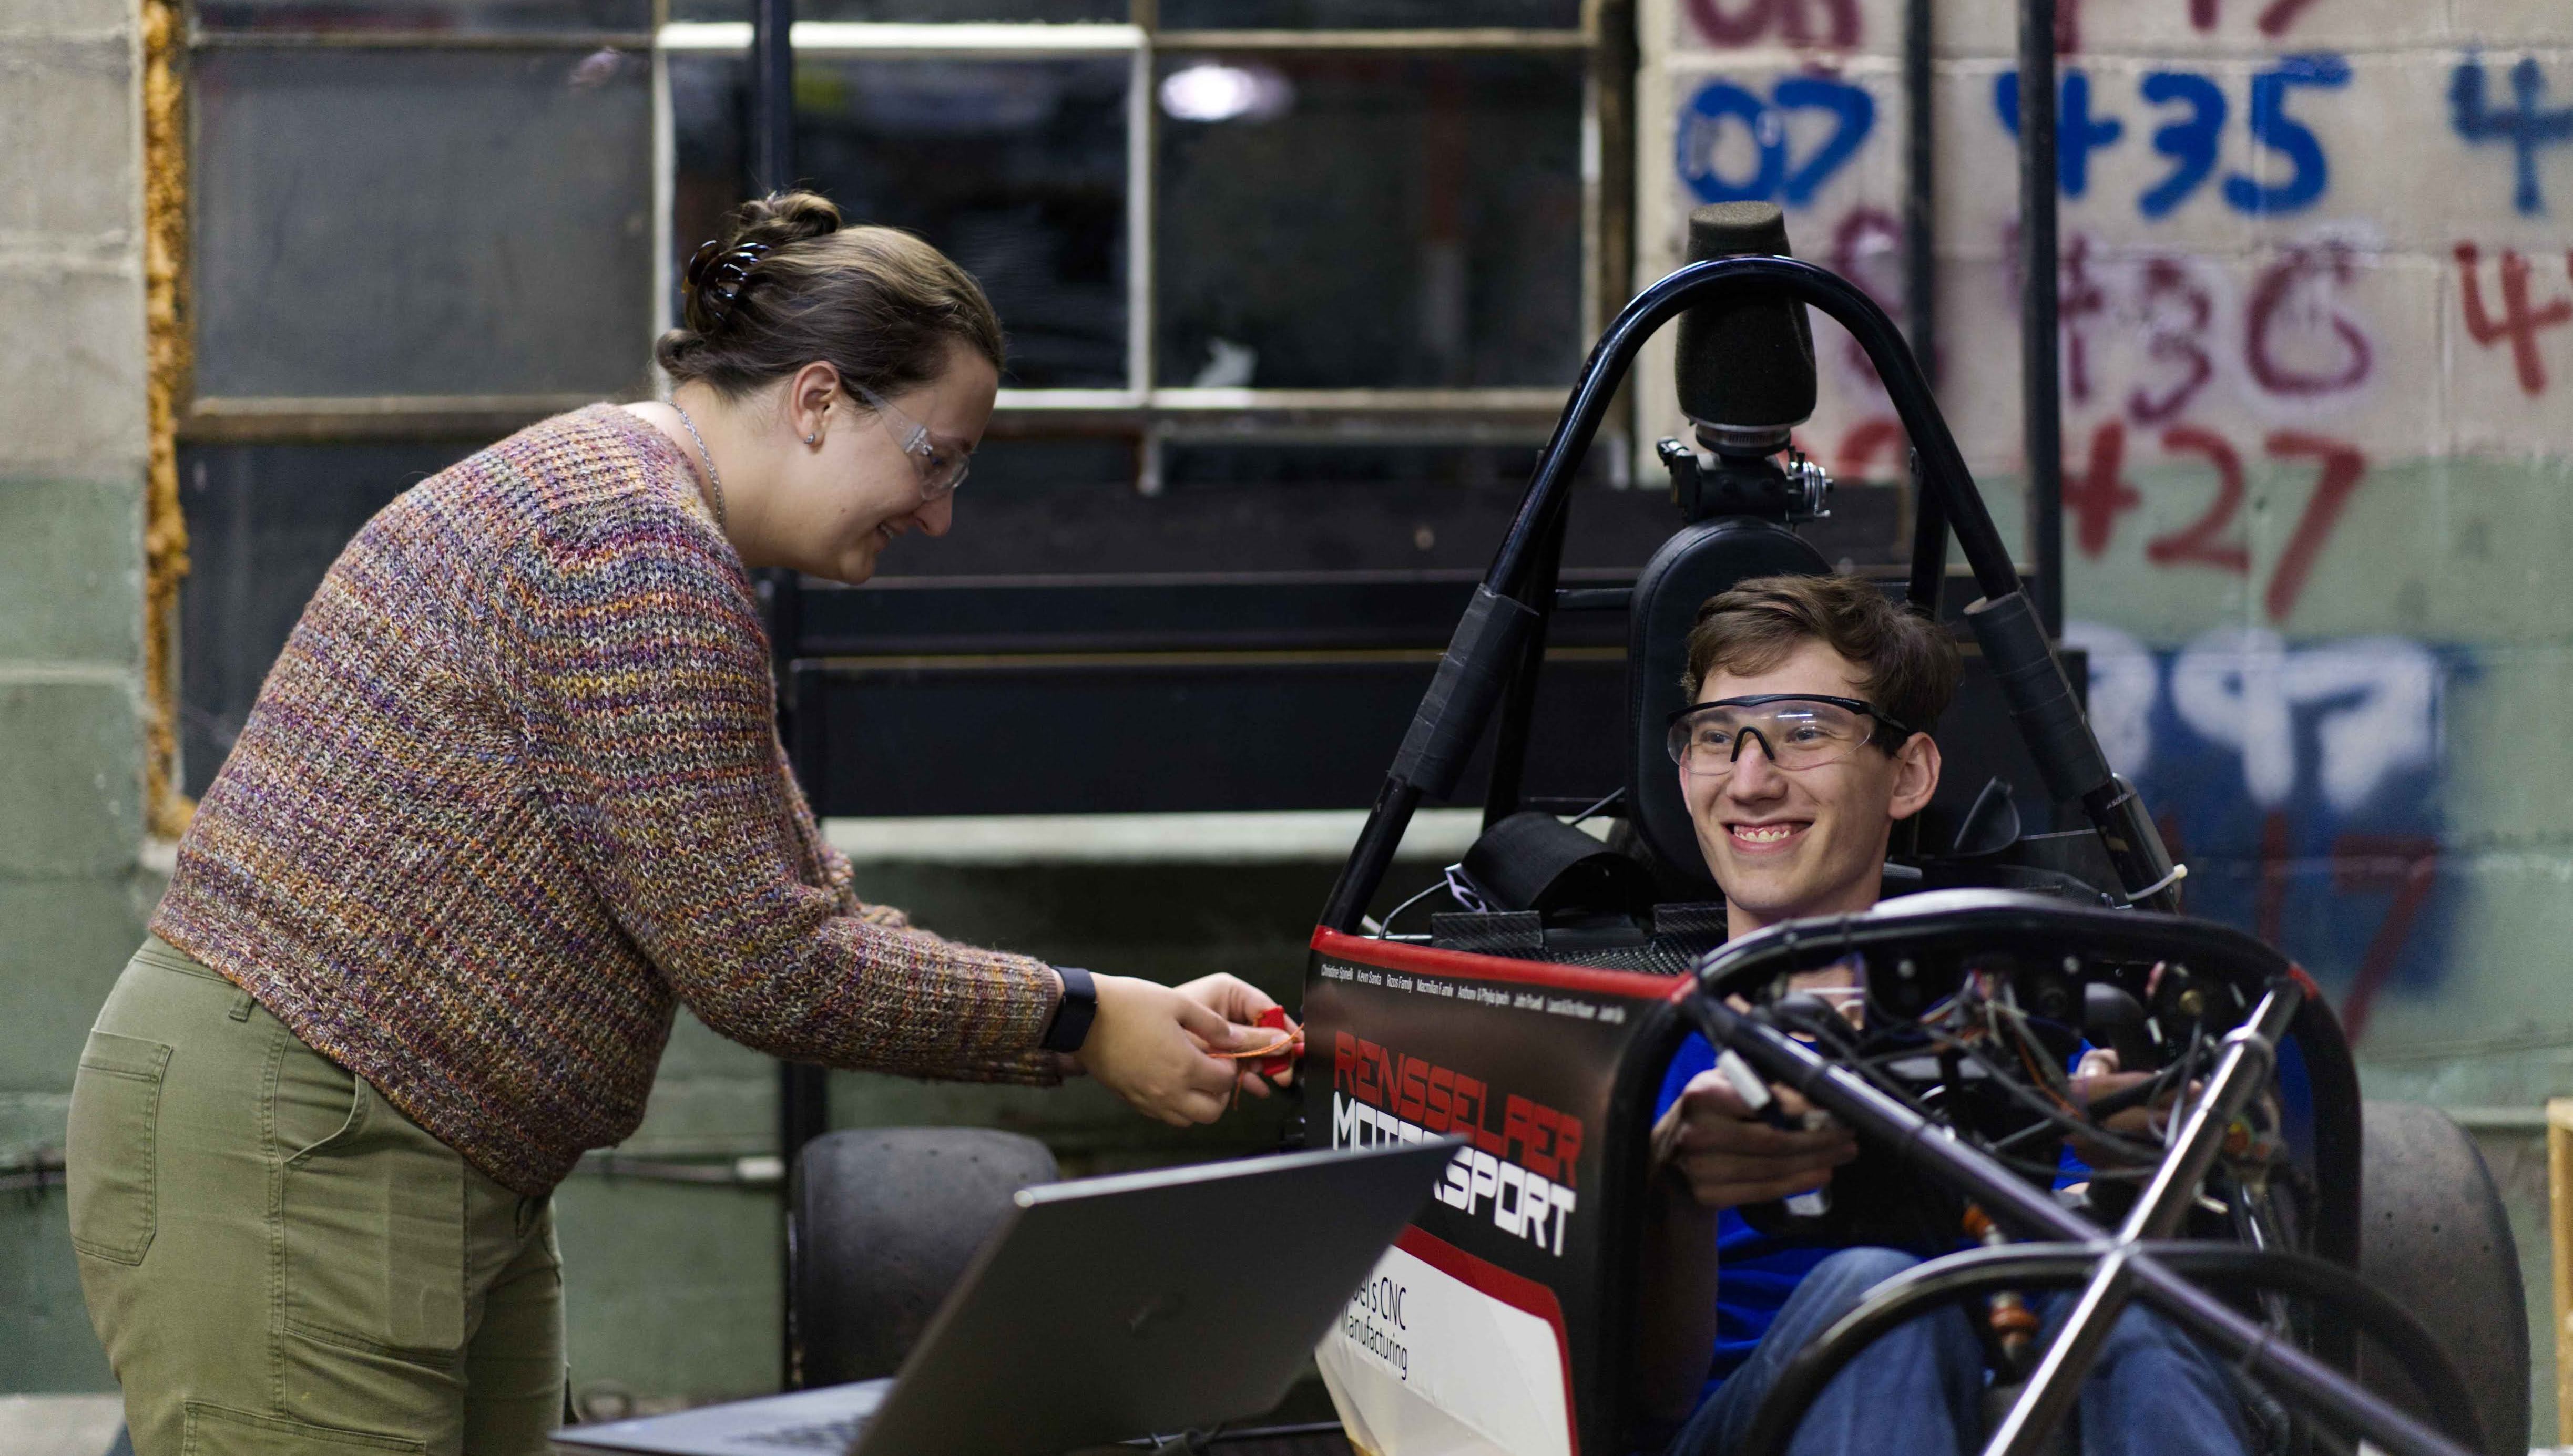 A student smiling while sitting in a former Motorsport vehicle, with someone working on the side.